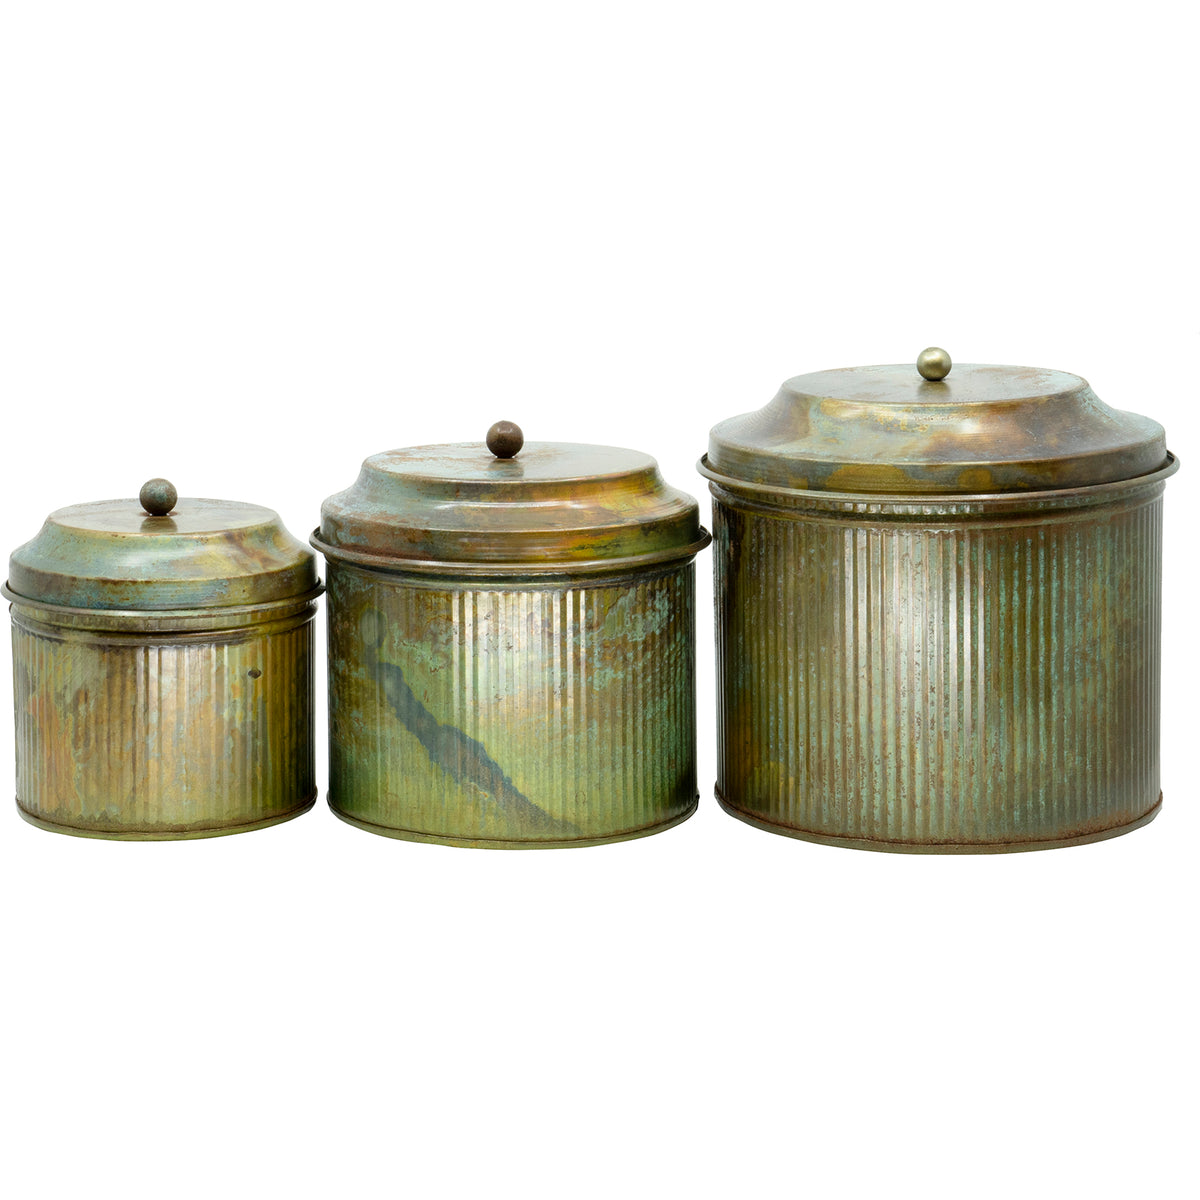 Set of 4 Large Vintage Antique Style Round Metal Nesting Kitchen Canisters  with Lids Sugar Tea Coffee and Flour